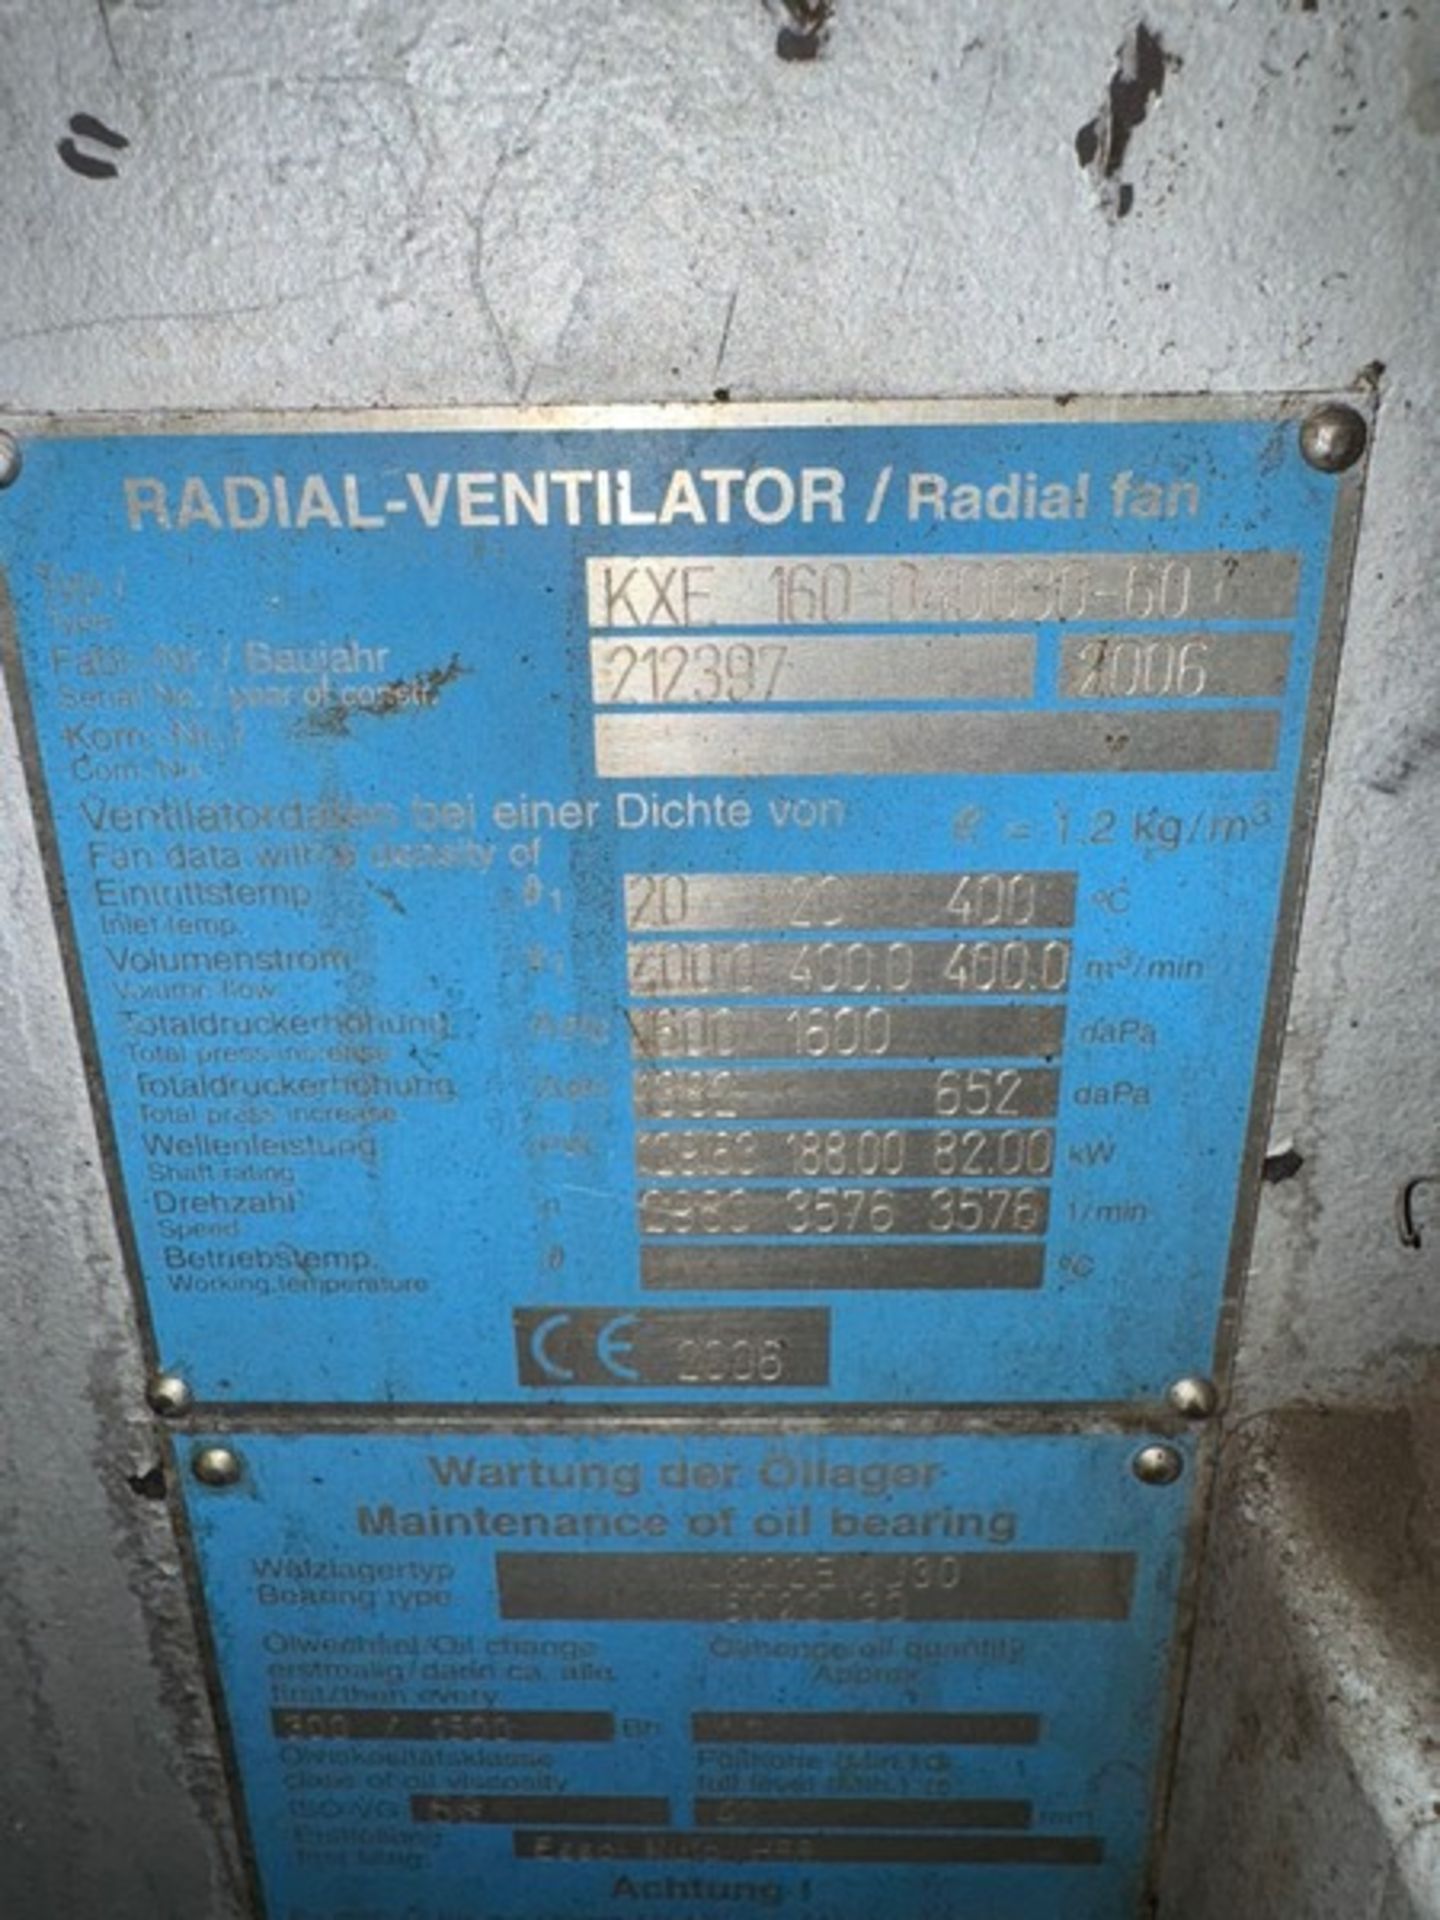 2006 Wartung der Öllager 160 kw Radial Hot Fan, Type: KXE 160-040030-60, S/N 212397, Includes Square - Image 5 of 15